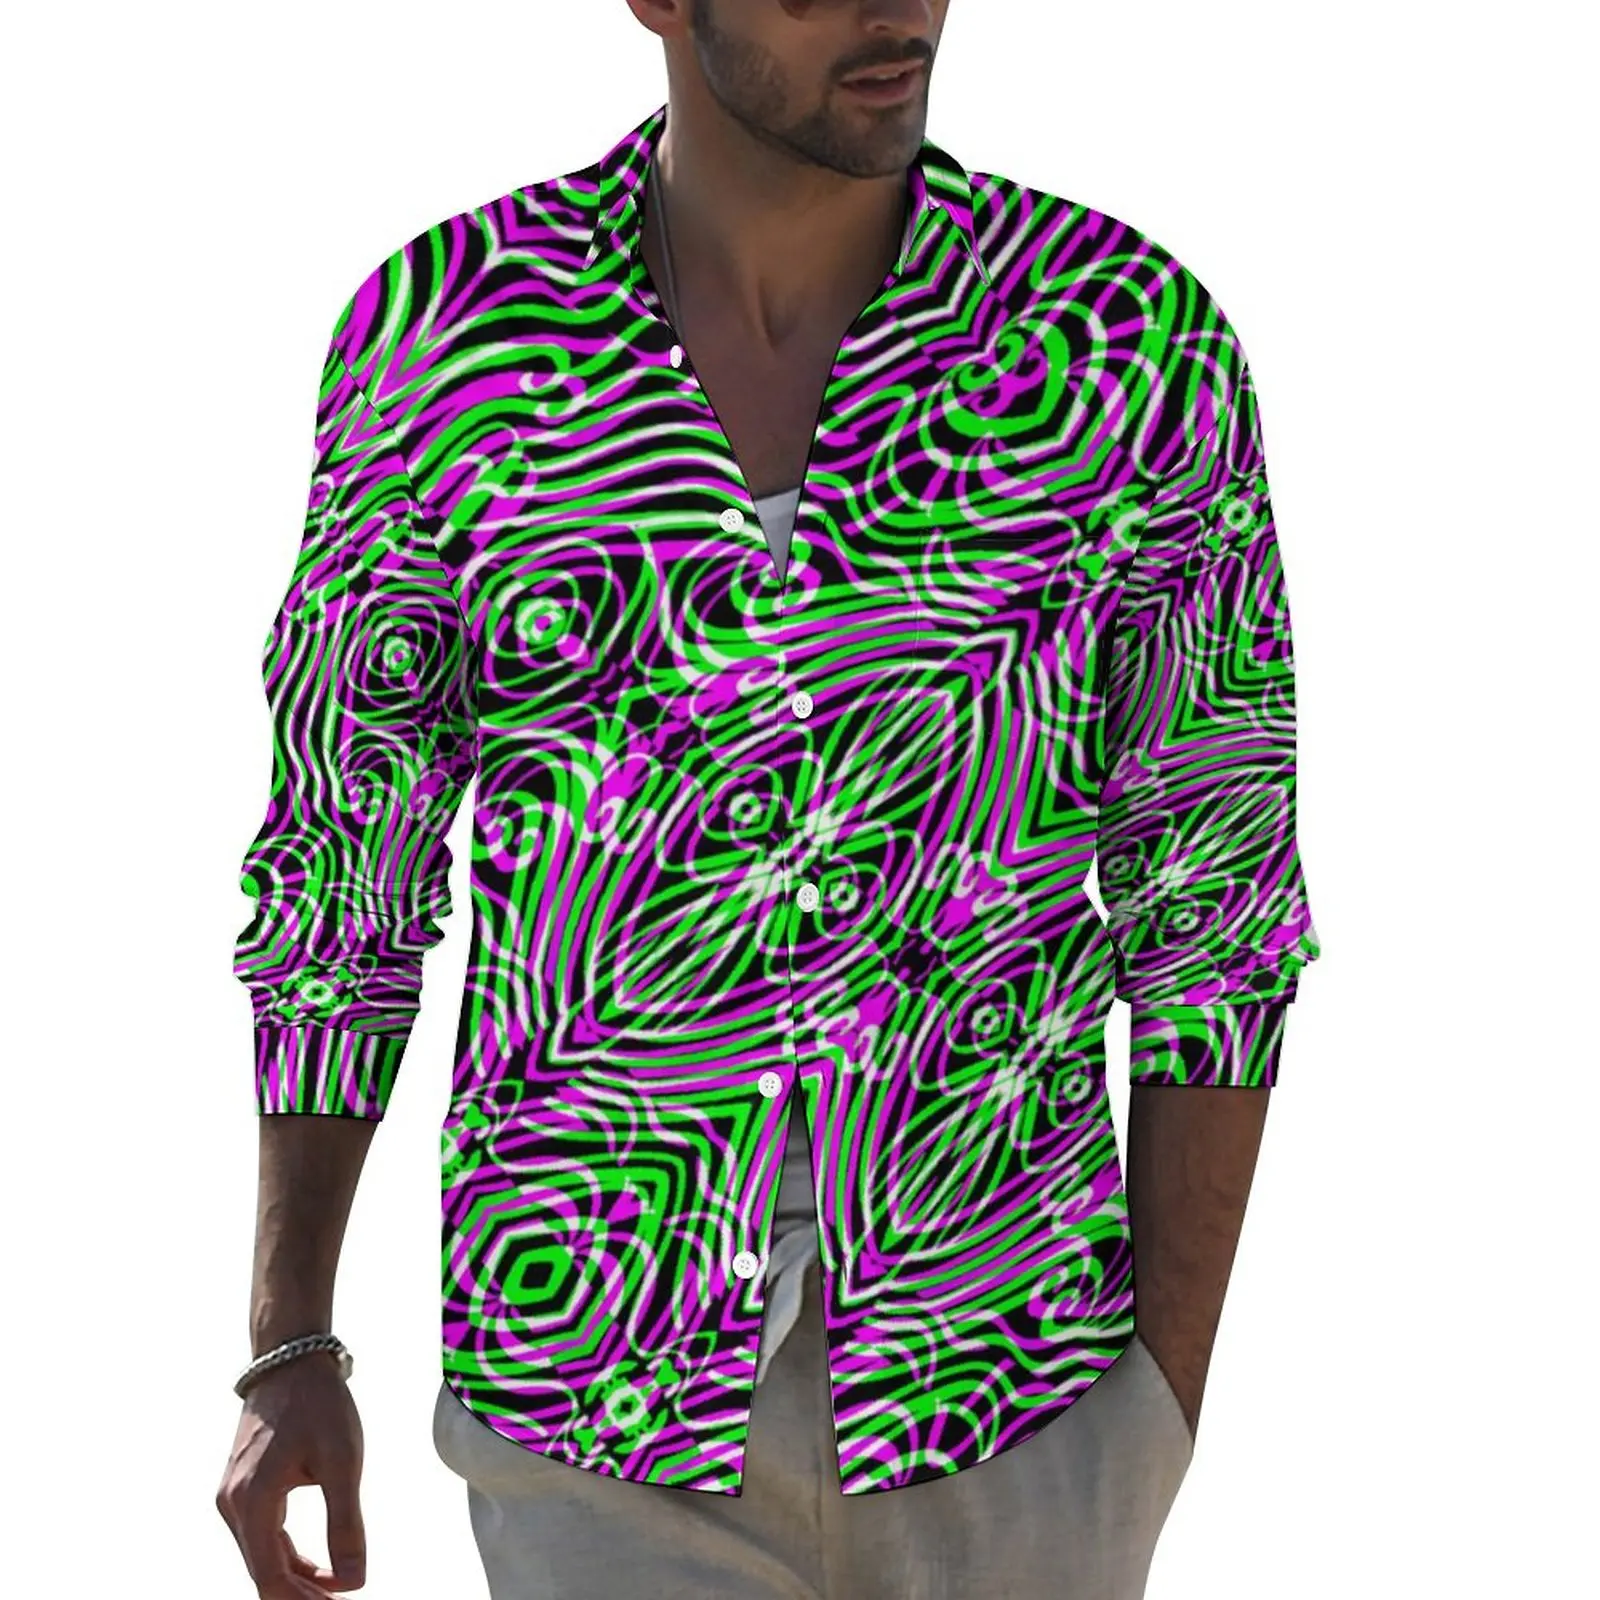 

Geometry Casual Shirts Male Fluid Lines Print Shirt Long Sleeve Fashion Aesthetic Blouses Autumn Graphic Tops Plus Size 3XL 4XL